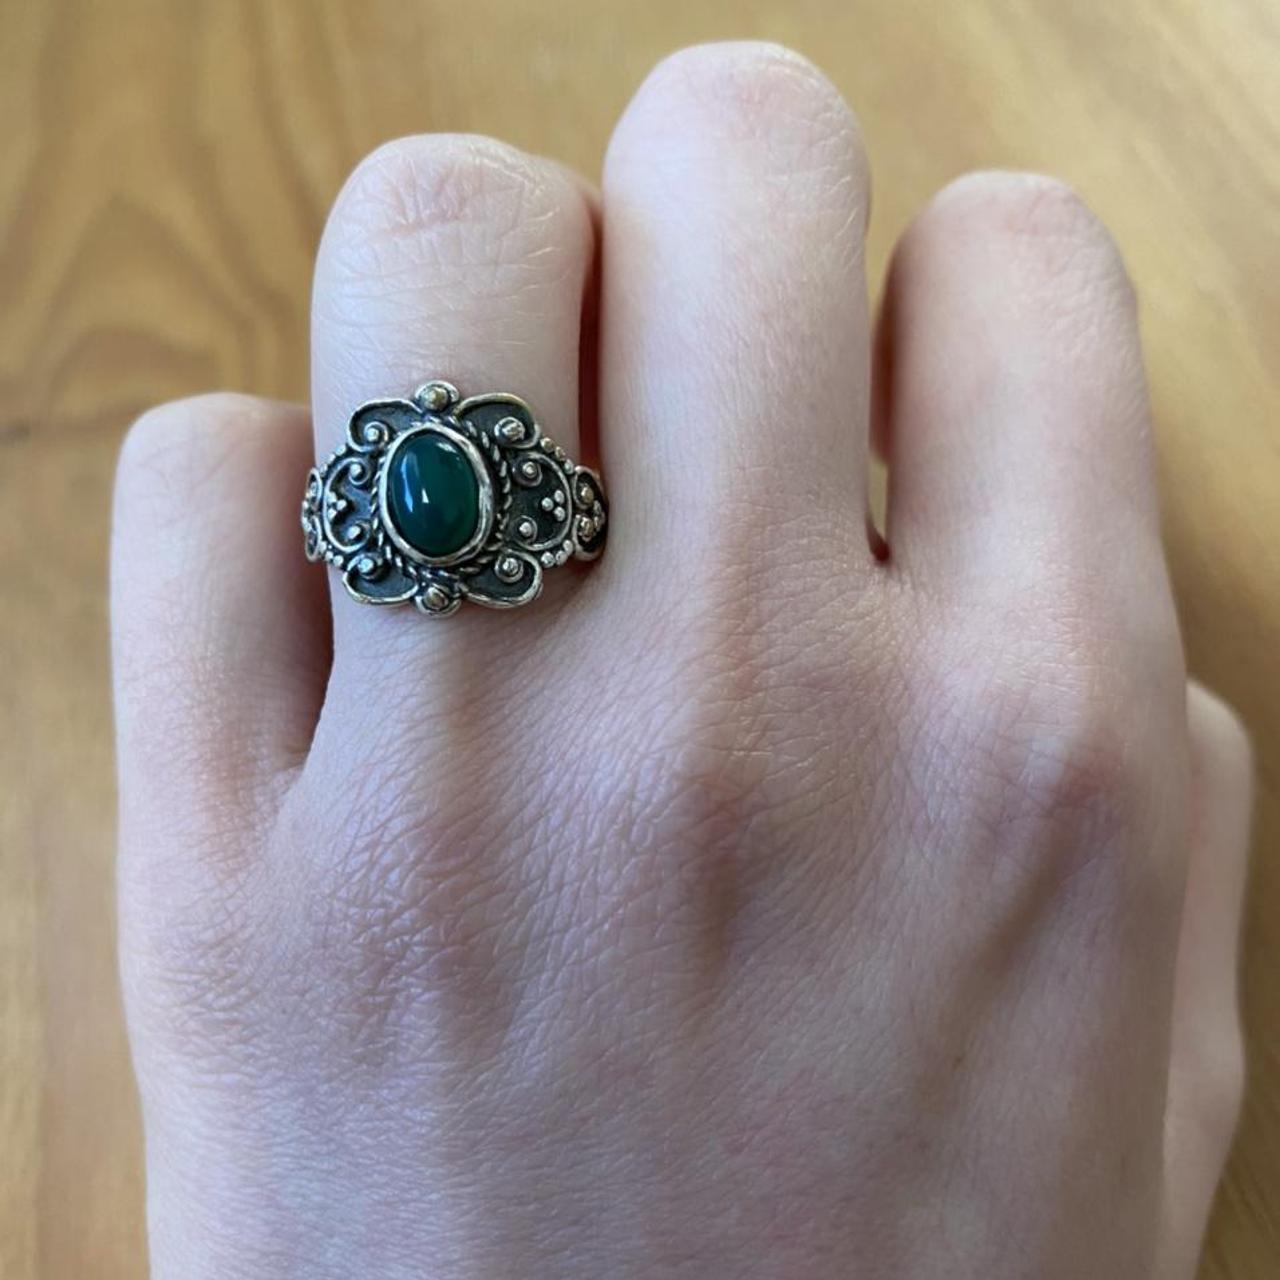 Product Image 1 - Ornamented silver ring with emerald